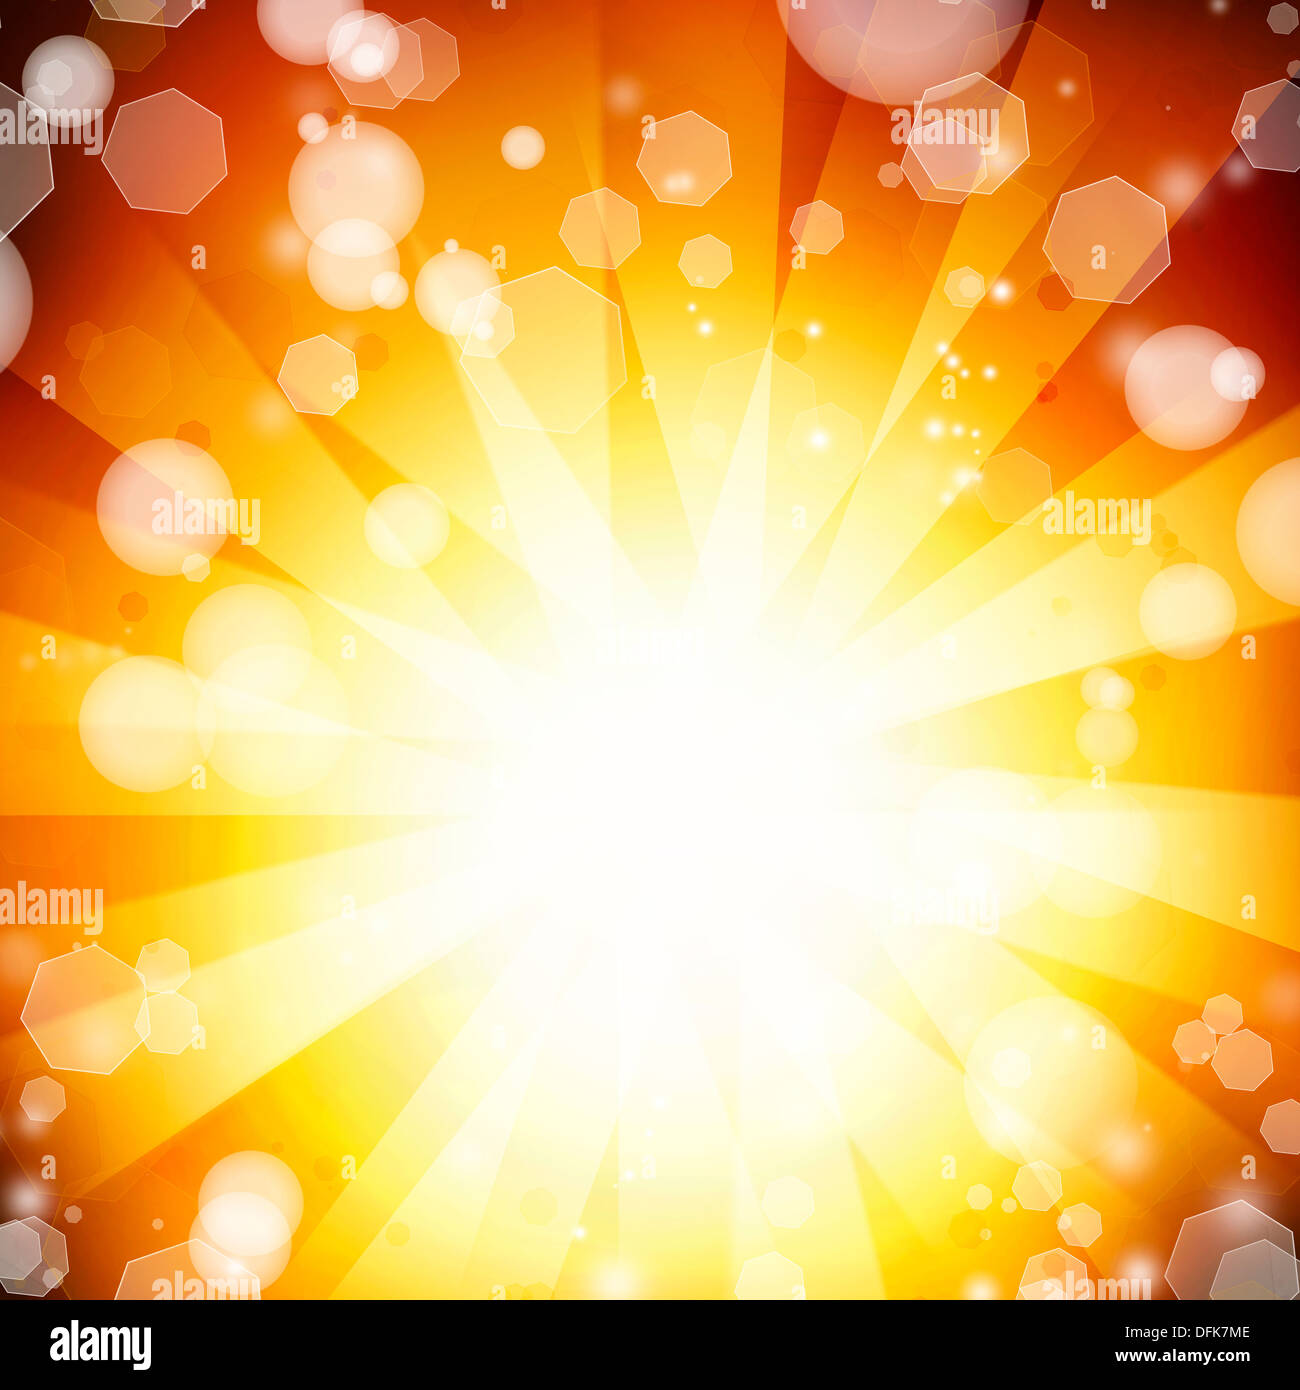 Bright yellow and orange abstract background Stock Photo